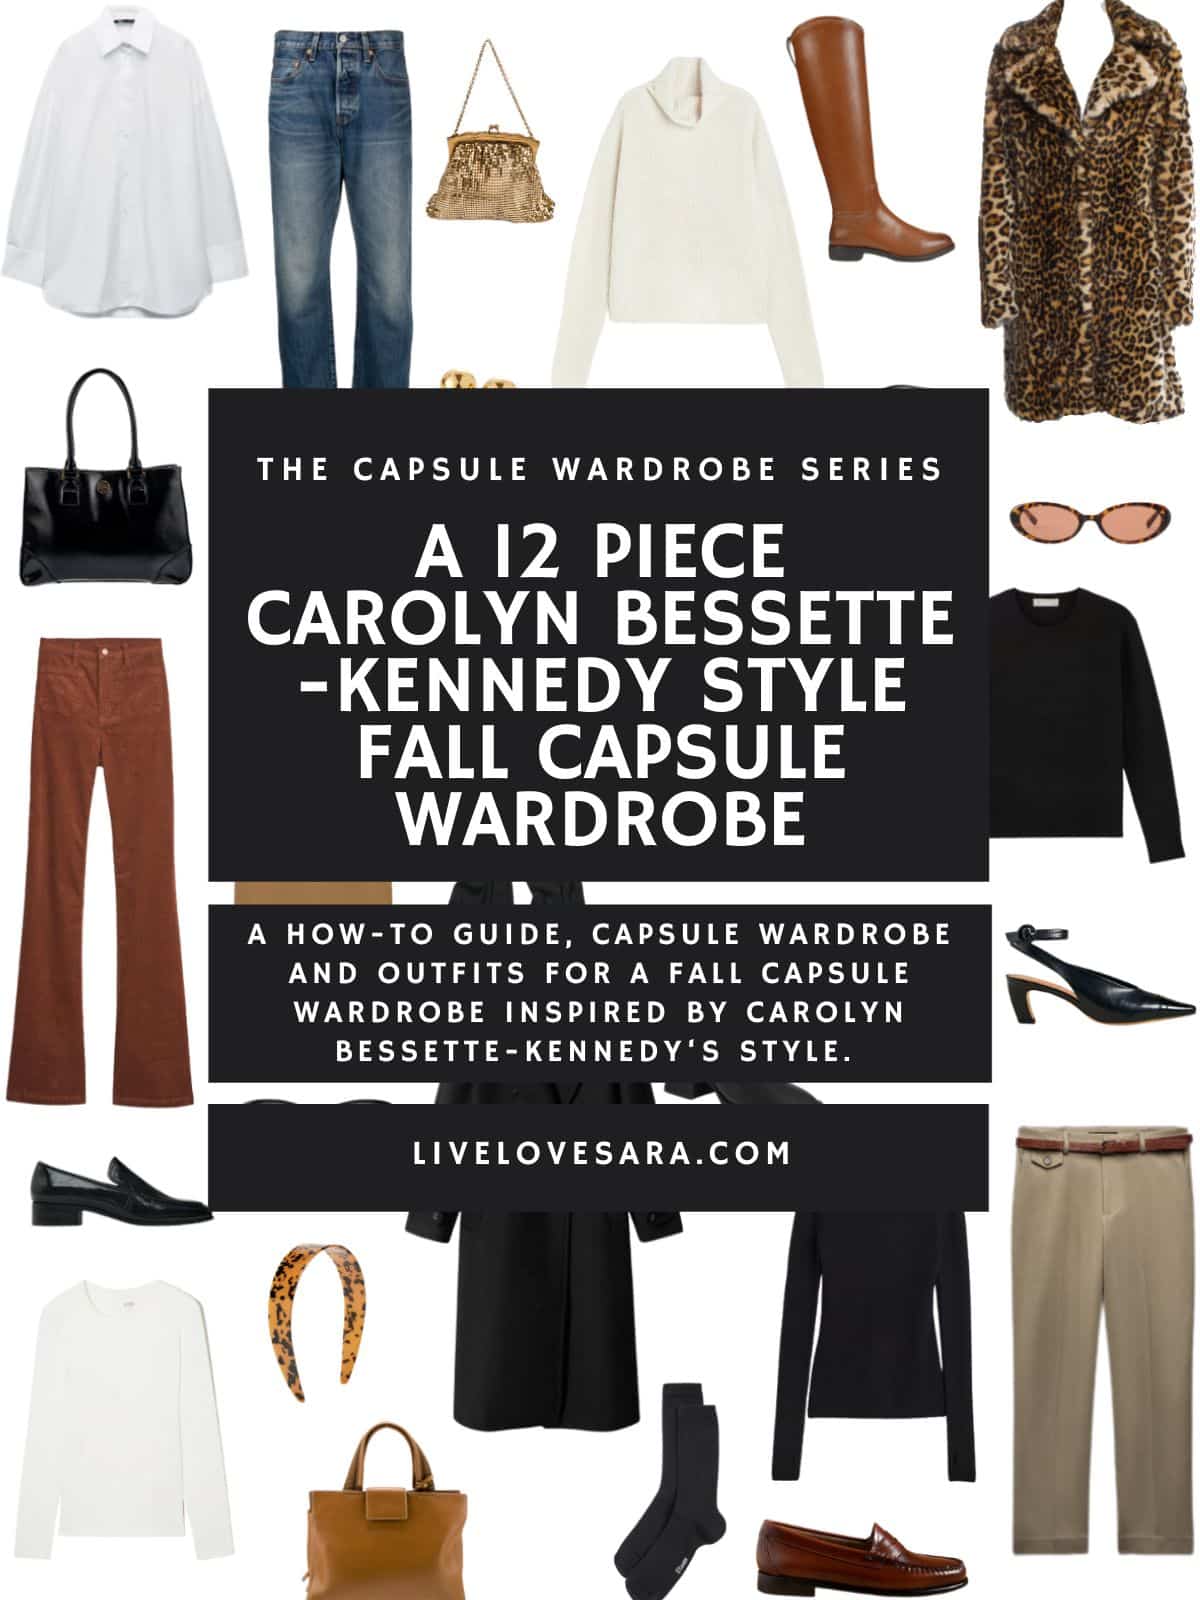 A white background with 12 clothing items plus shoes and accessories for a Carolyn Bessette-Kennedy Styler Fall capsule wardrobe. In the middle is a black box with white text that reads, "A 12 Piece Carolyn Bessette-Kennedy Style Fall Capsule Wardrobe."